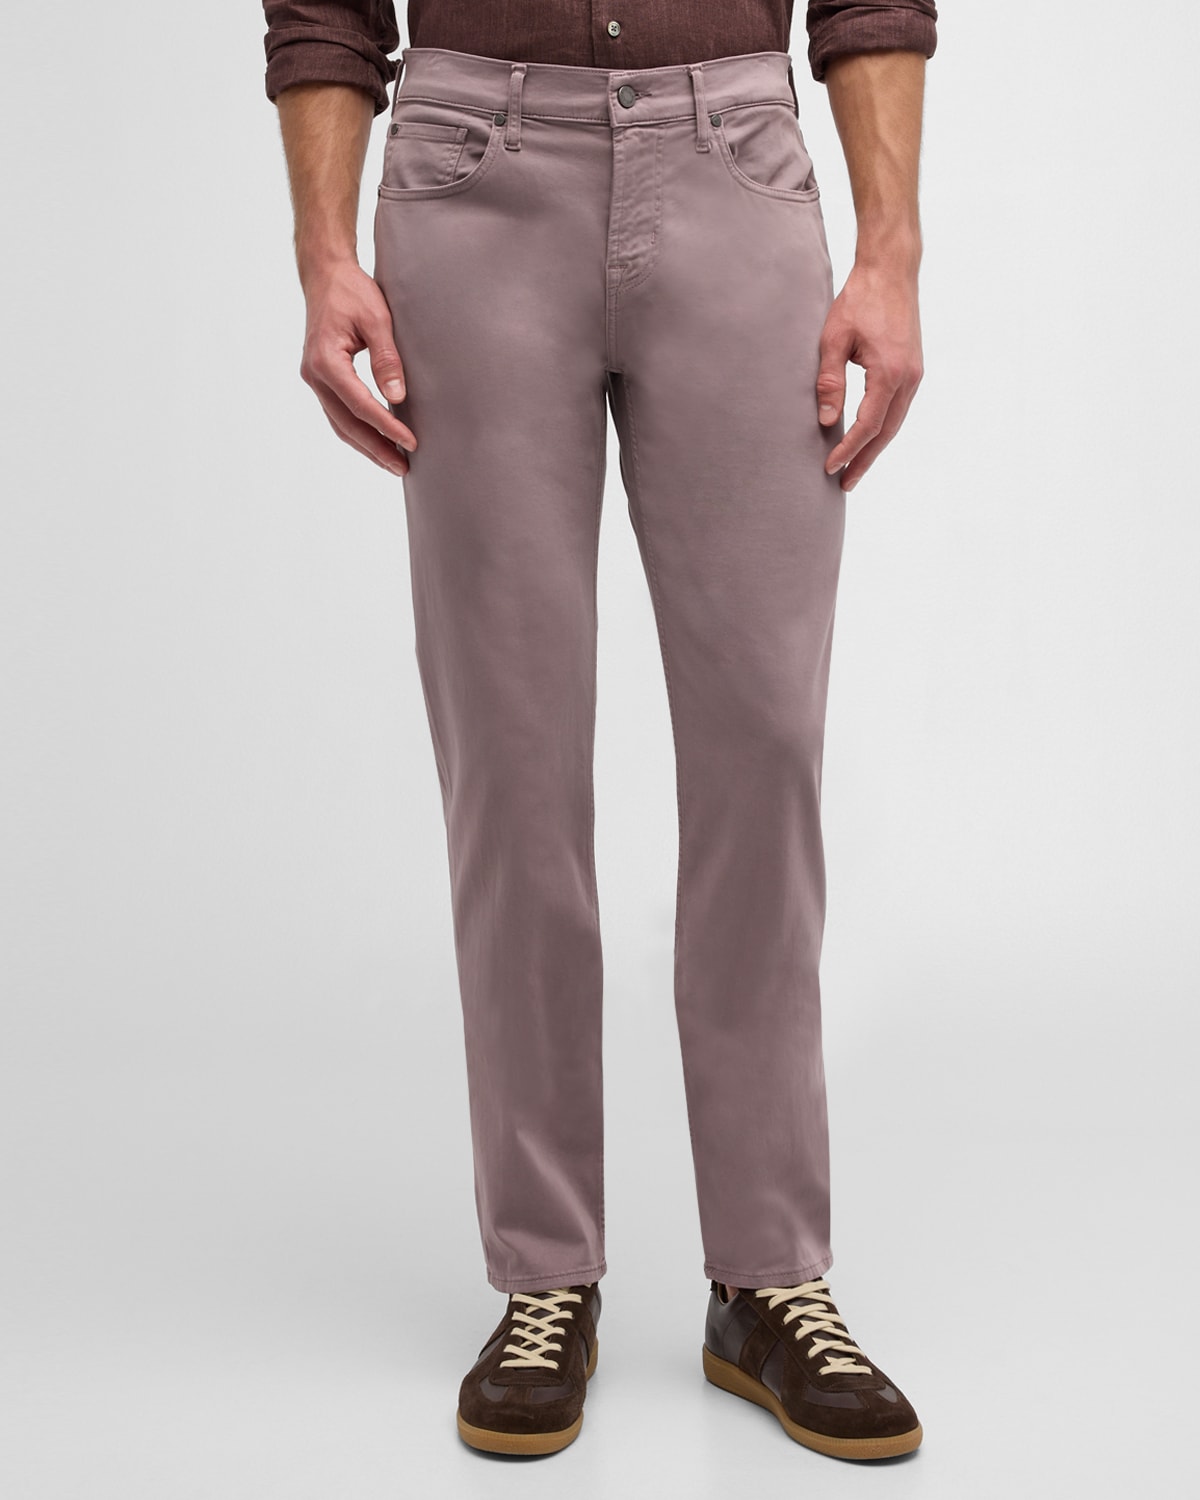 7 For All Mankind Men's Slimmy Luxe Performance Plus Pants In Mauve